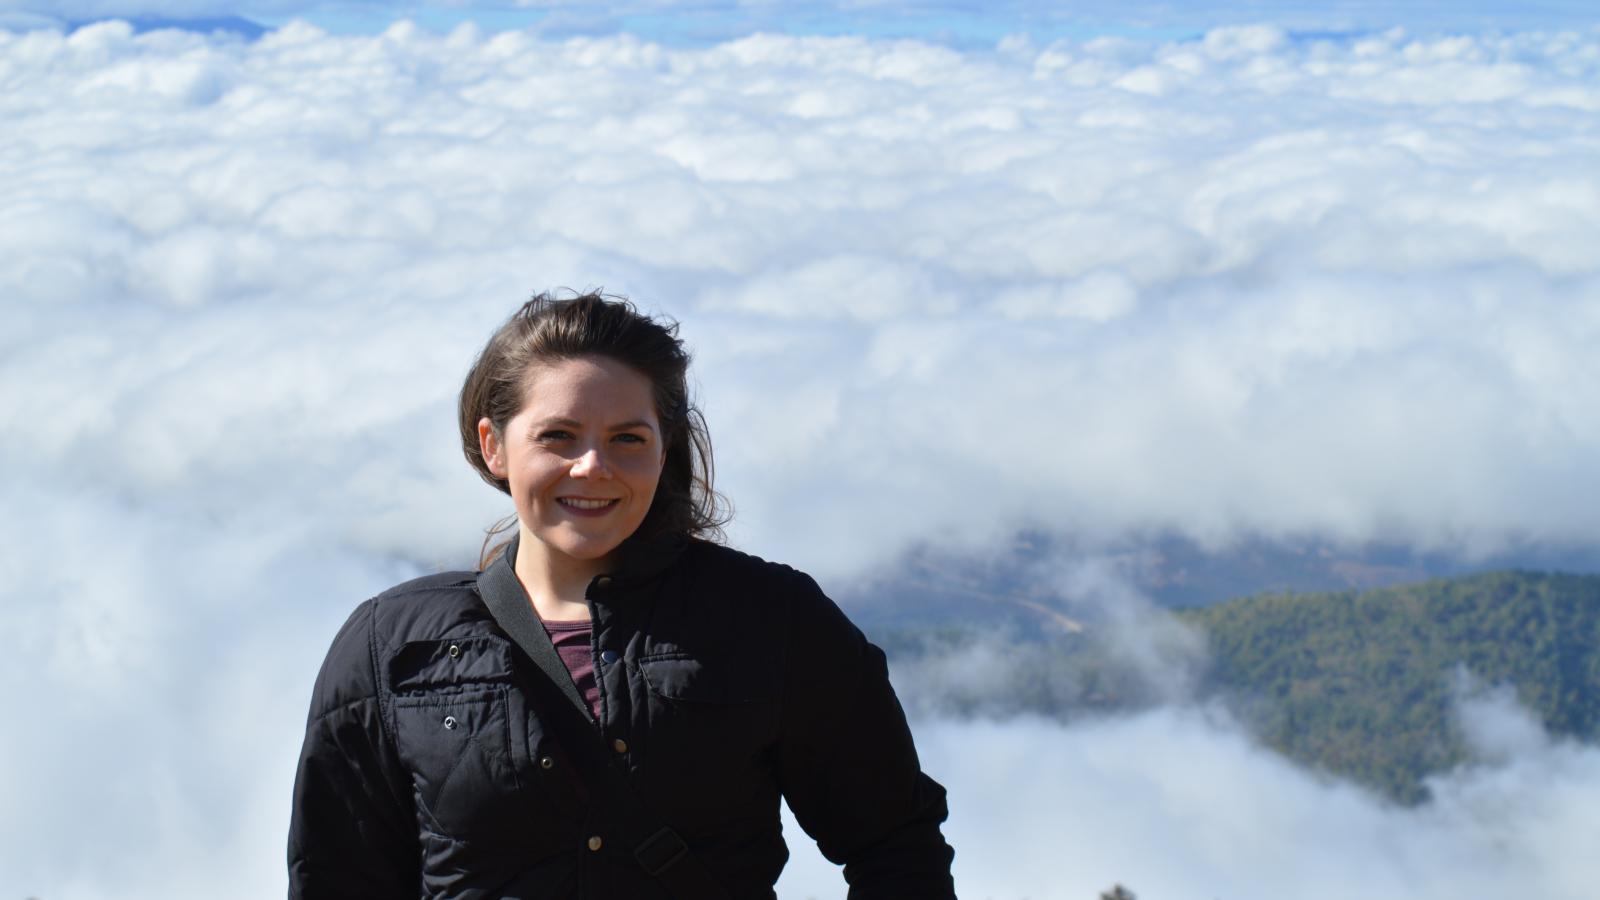 Lindsey in Huehuetanango, Guatemala, at the overlook above the clouds